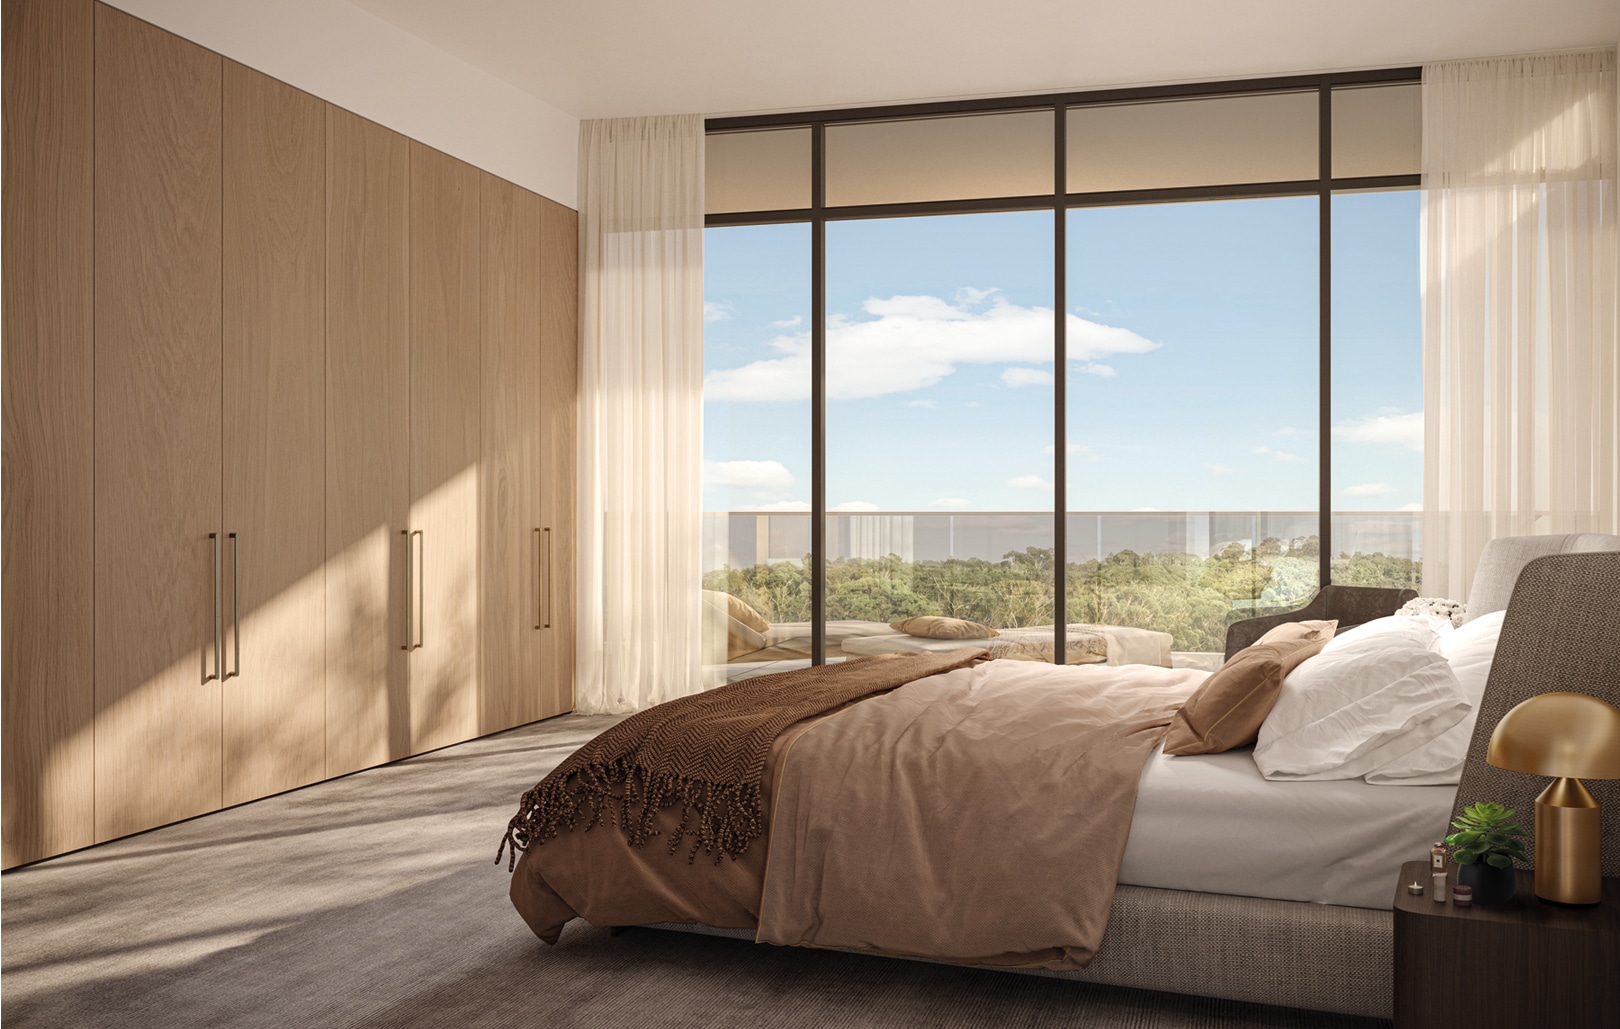 Watermark Chatswood Penthouse apartment bedroom